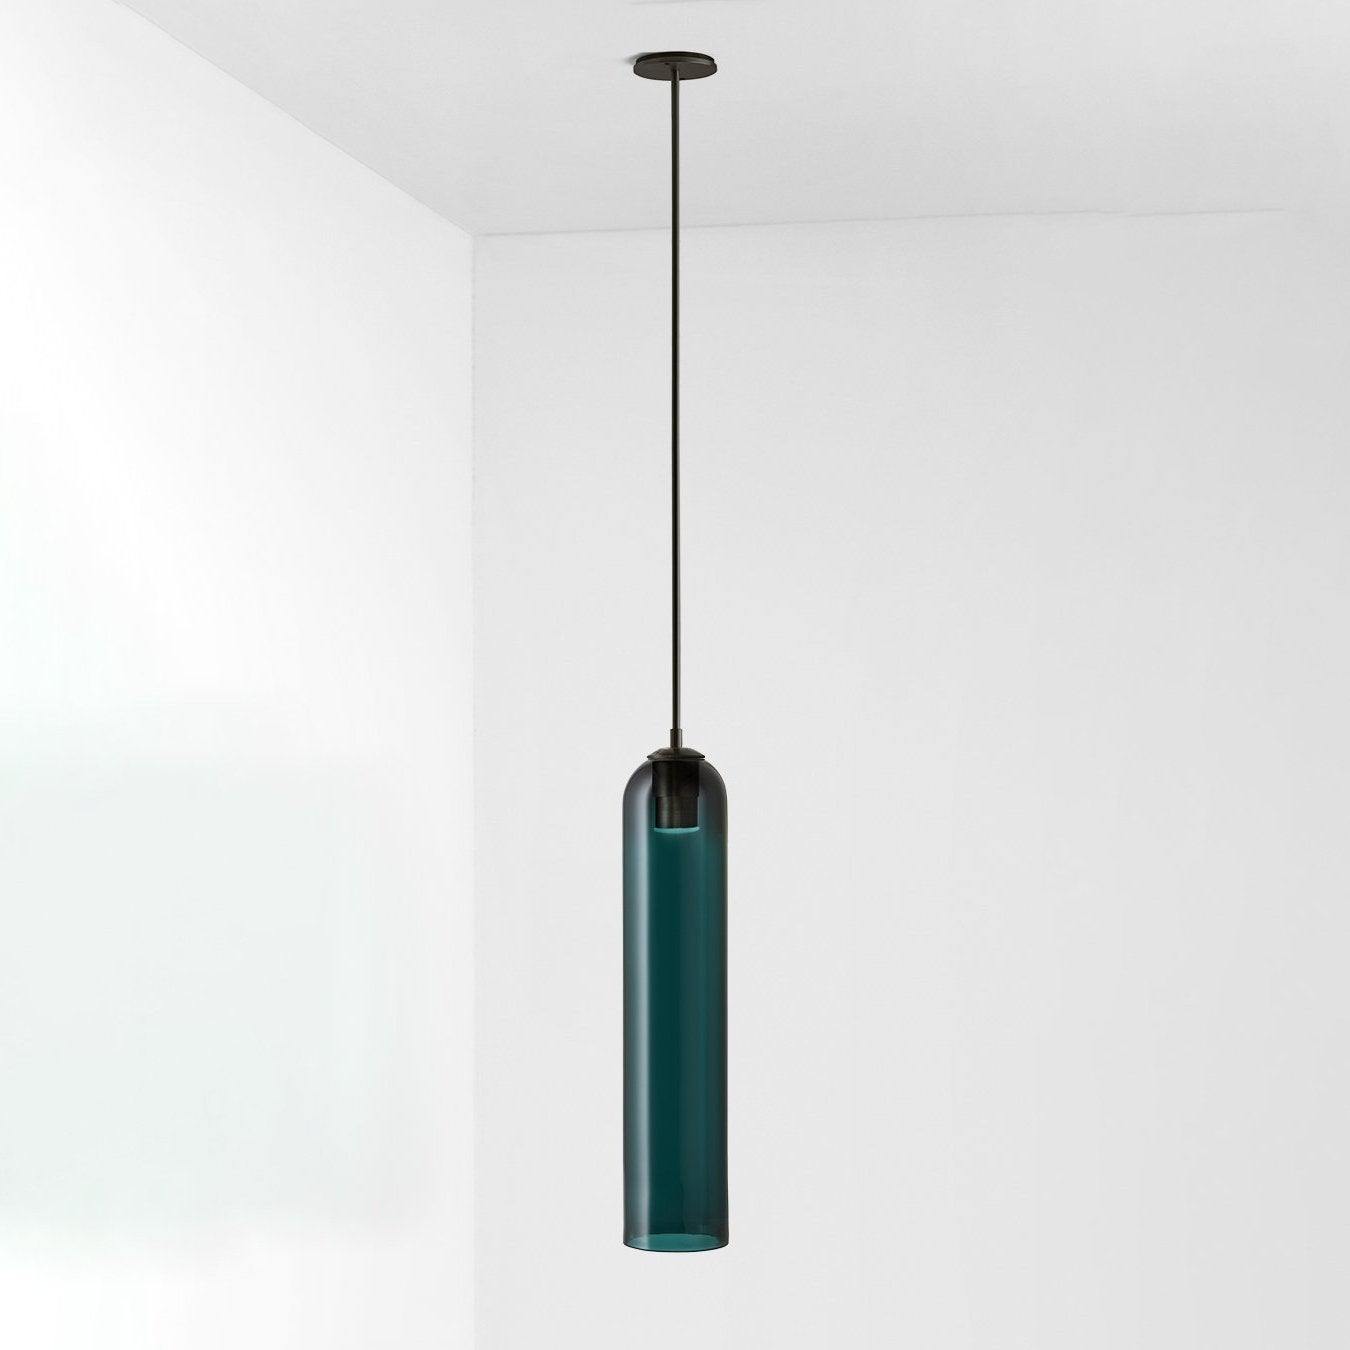 Glass wall sconce/pendant lamp